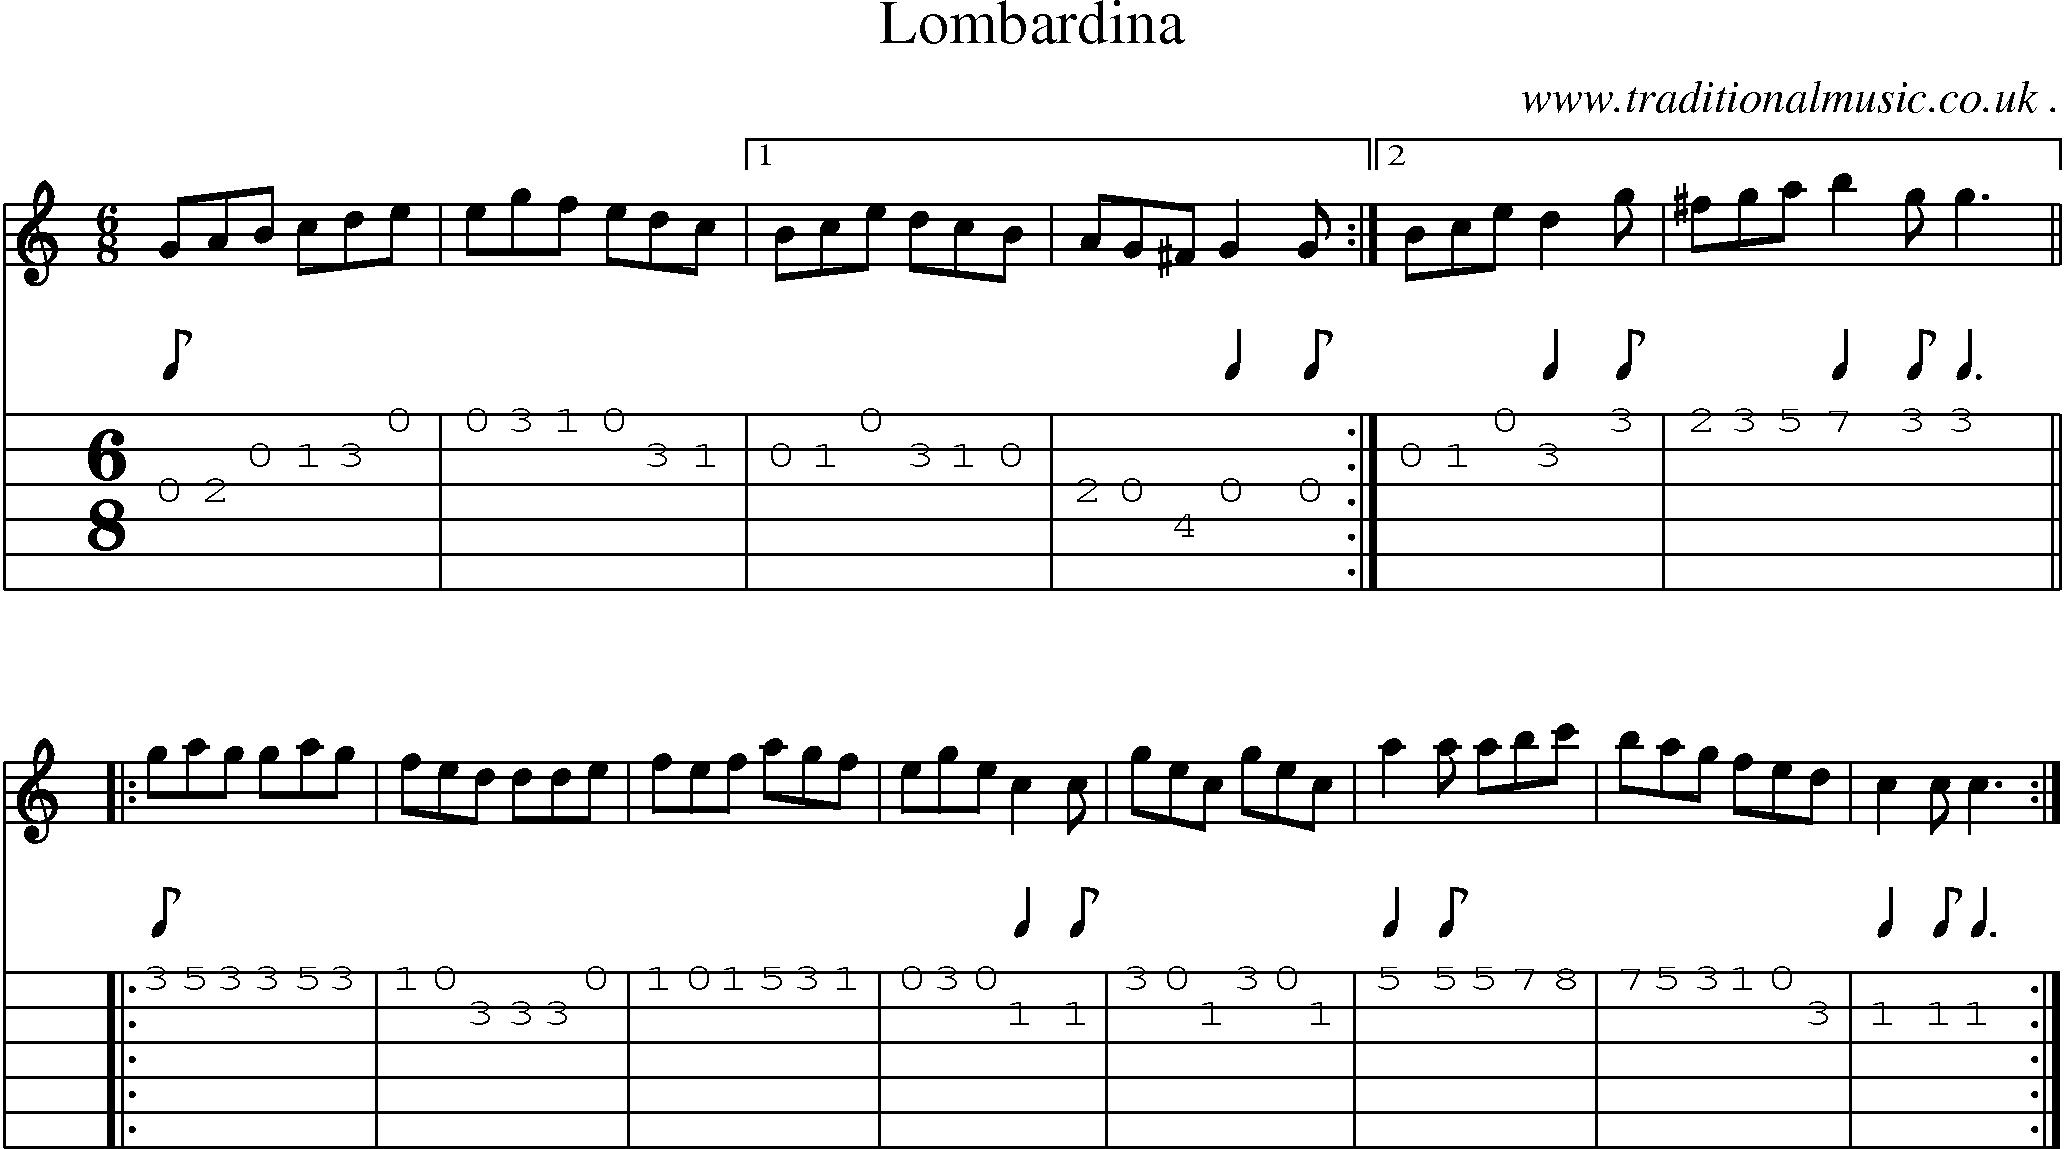 Sheet-Music and Guitar Tabs for Lombardina